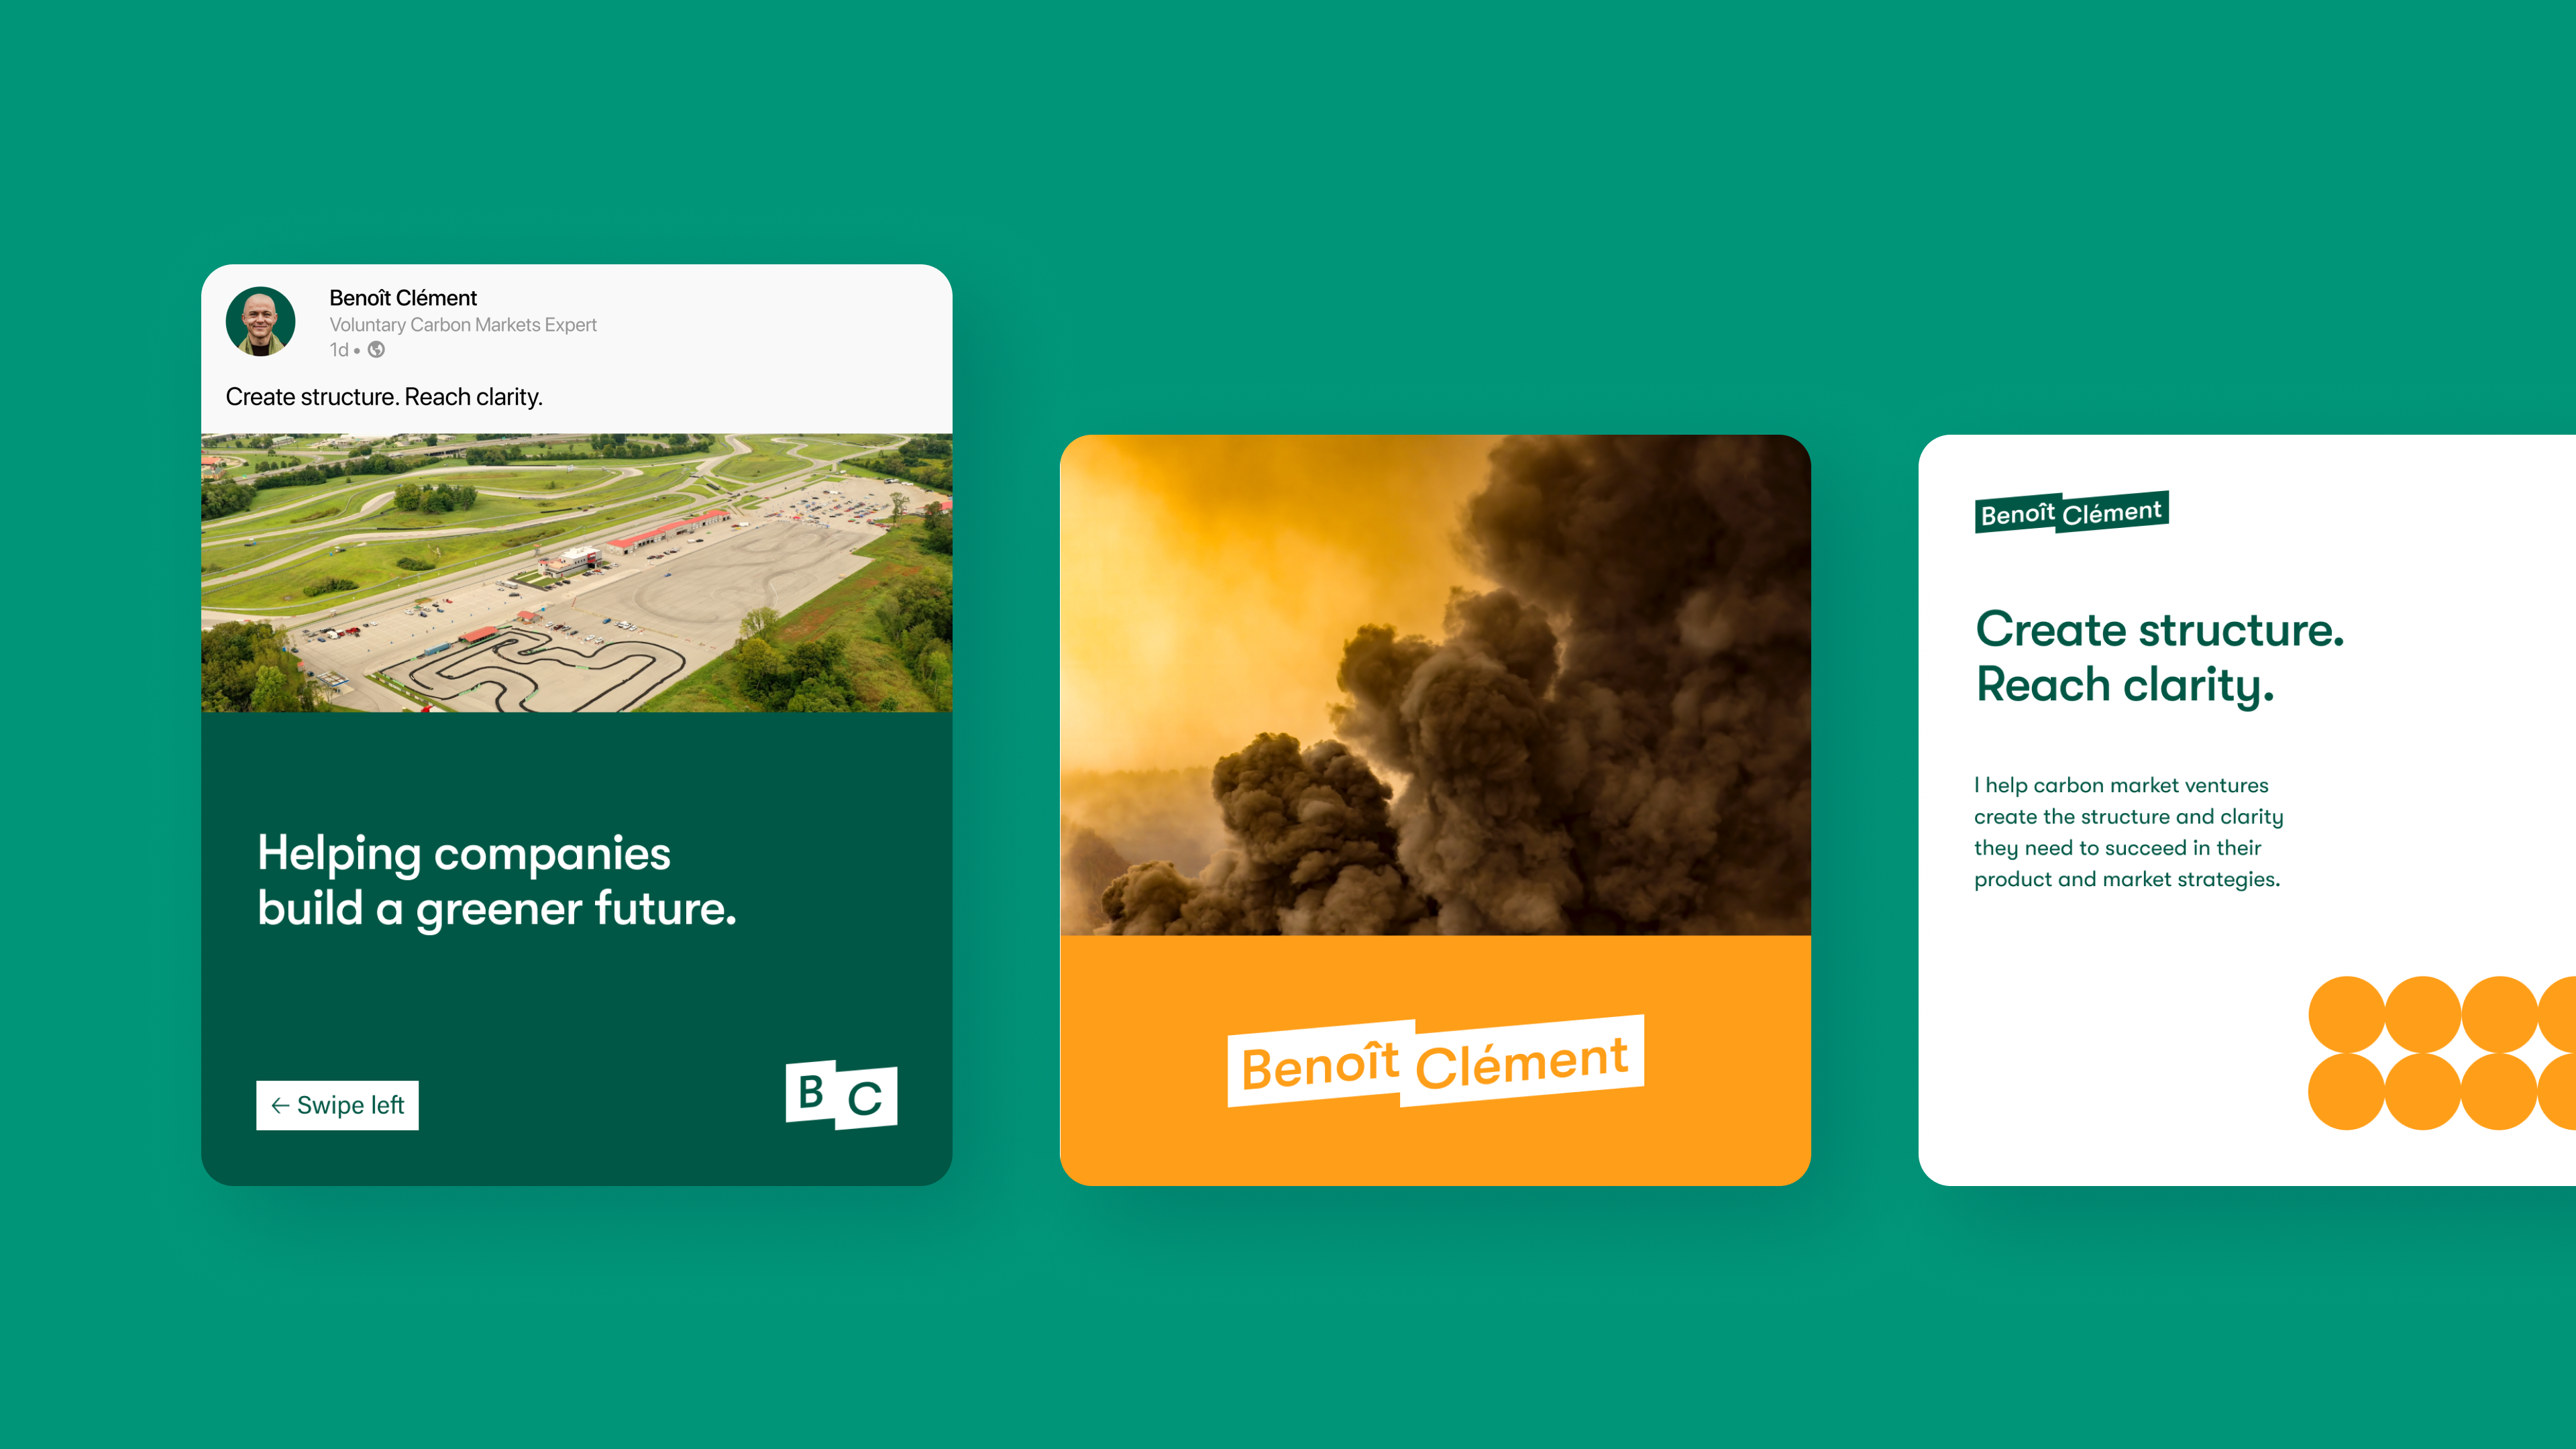 Three square images designed for LinkedIn, with messages like “Helping companies build a greener future” and “Create structure. Reach clarity.”